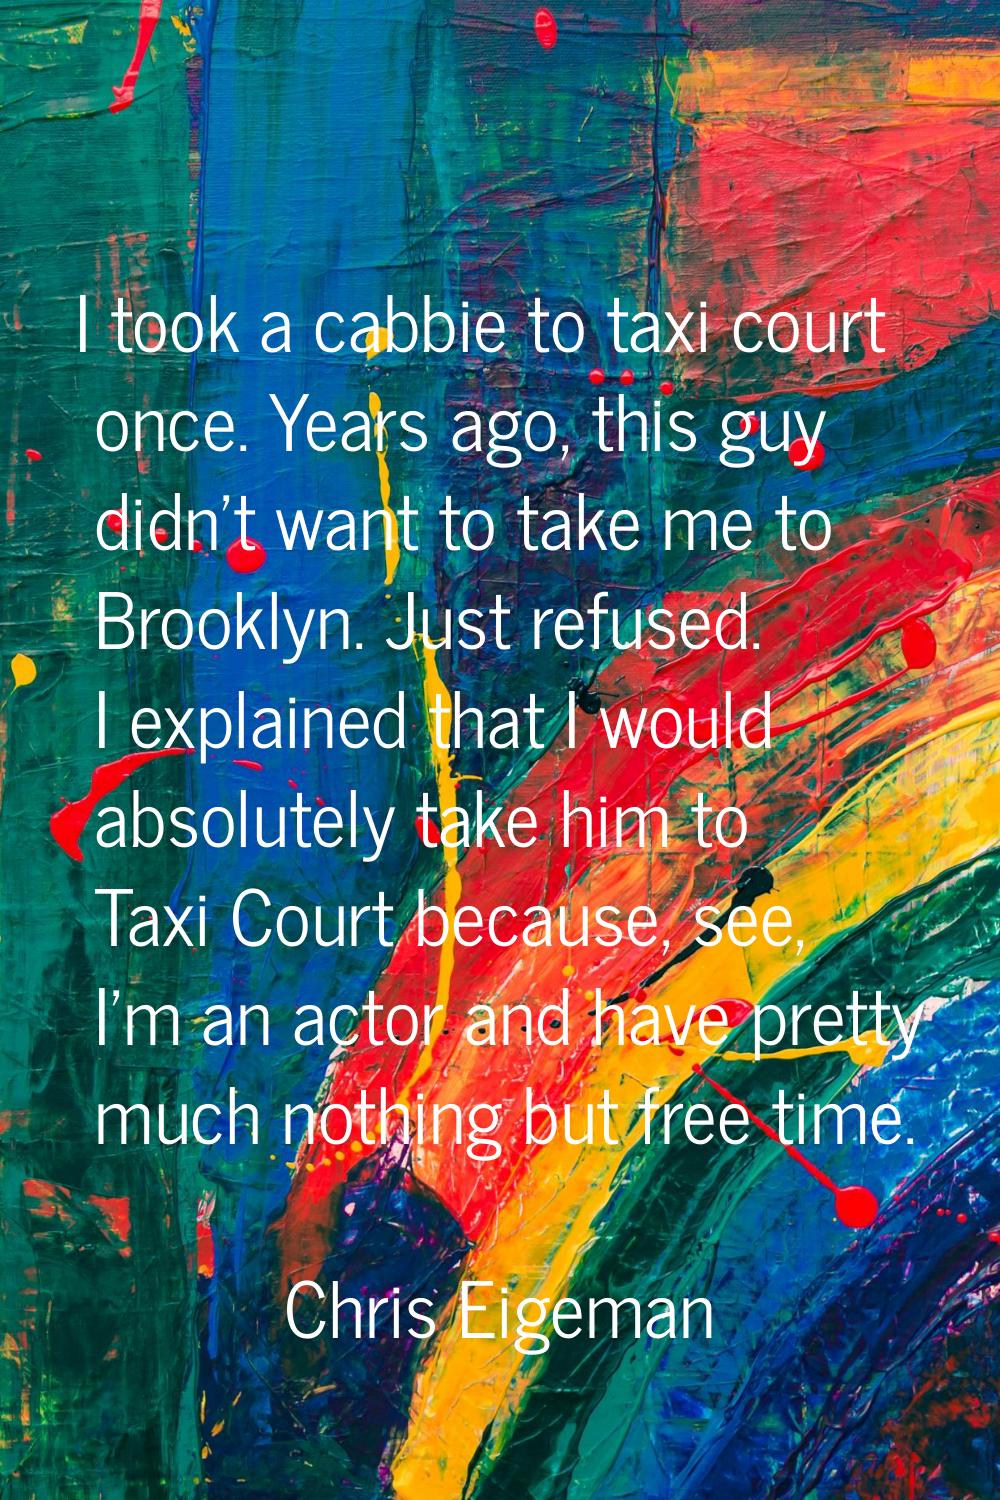 I took a cabbie to taxi court once. Years ago, this guy didn't want to take me to Brooklyn. Just re